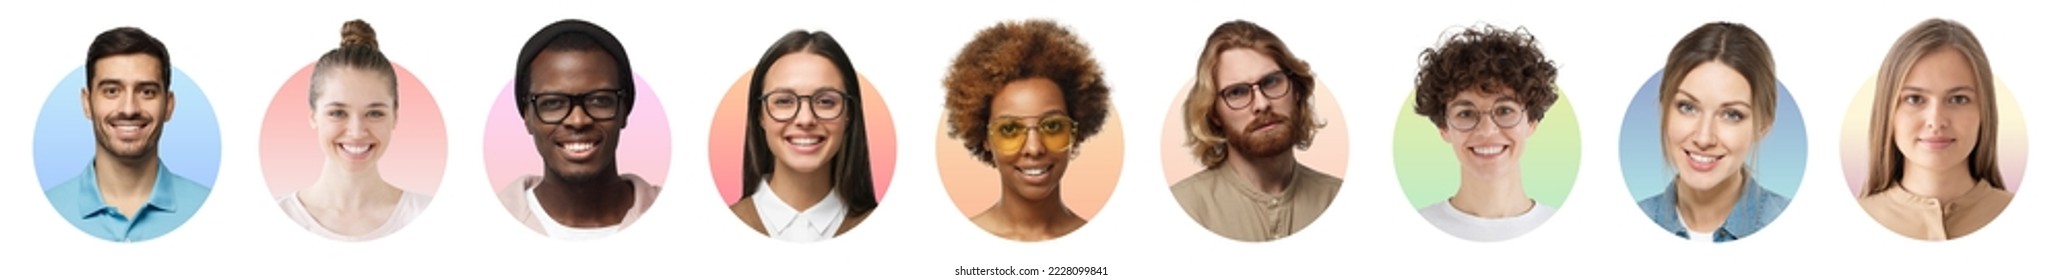 Collage of portraits and faces of multiracial group of various smiling young diverse people for userpic and profile picture - Shutterstock ID 2228099841